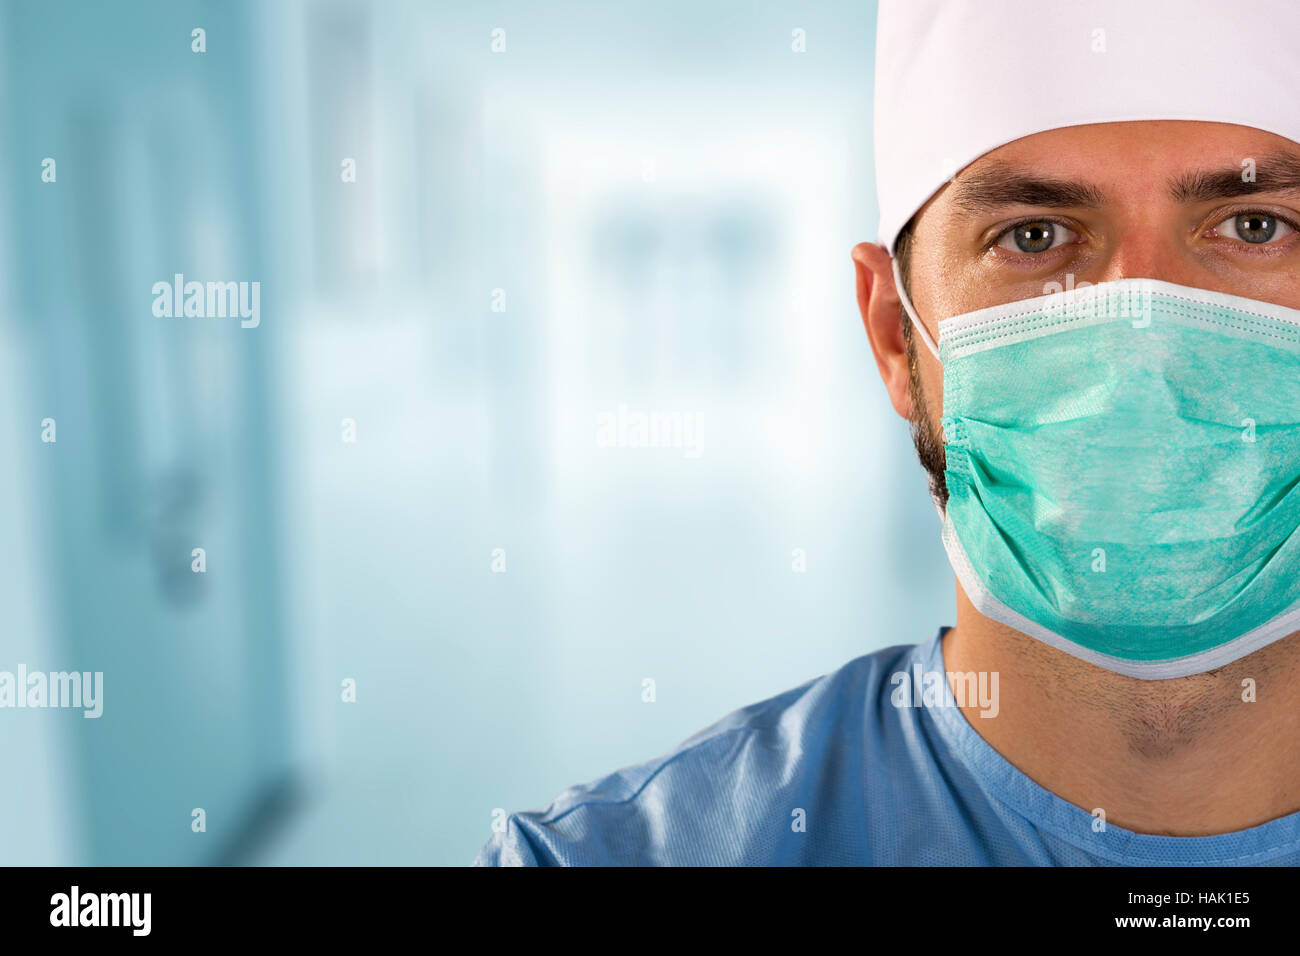 doctor surgeon with face mask standing in the hospital hallway Stock Photo